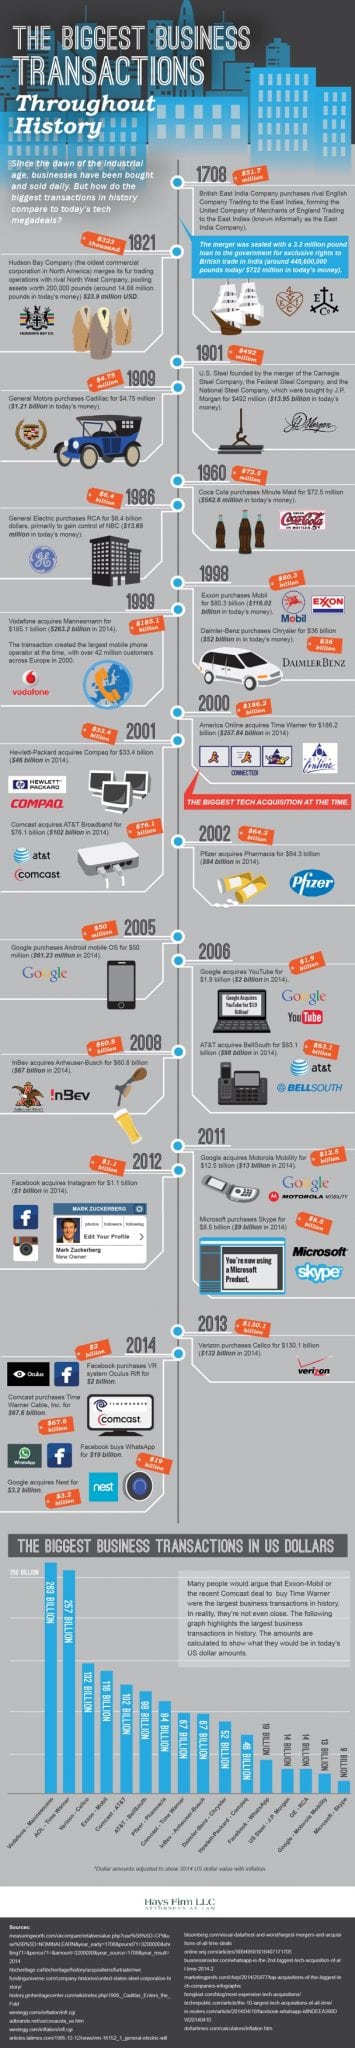 biggest-business-transactions-infographic